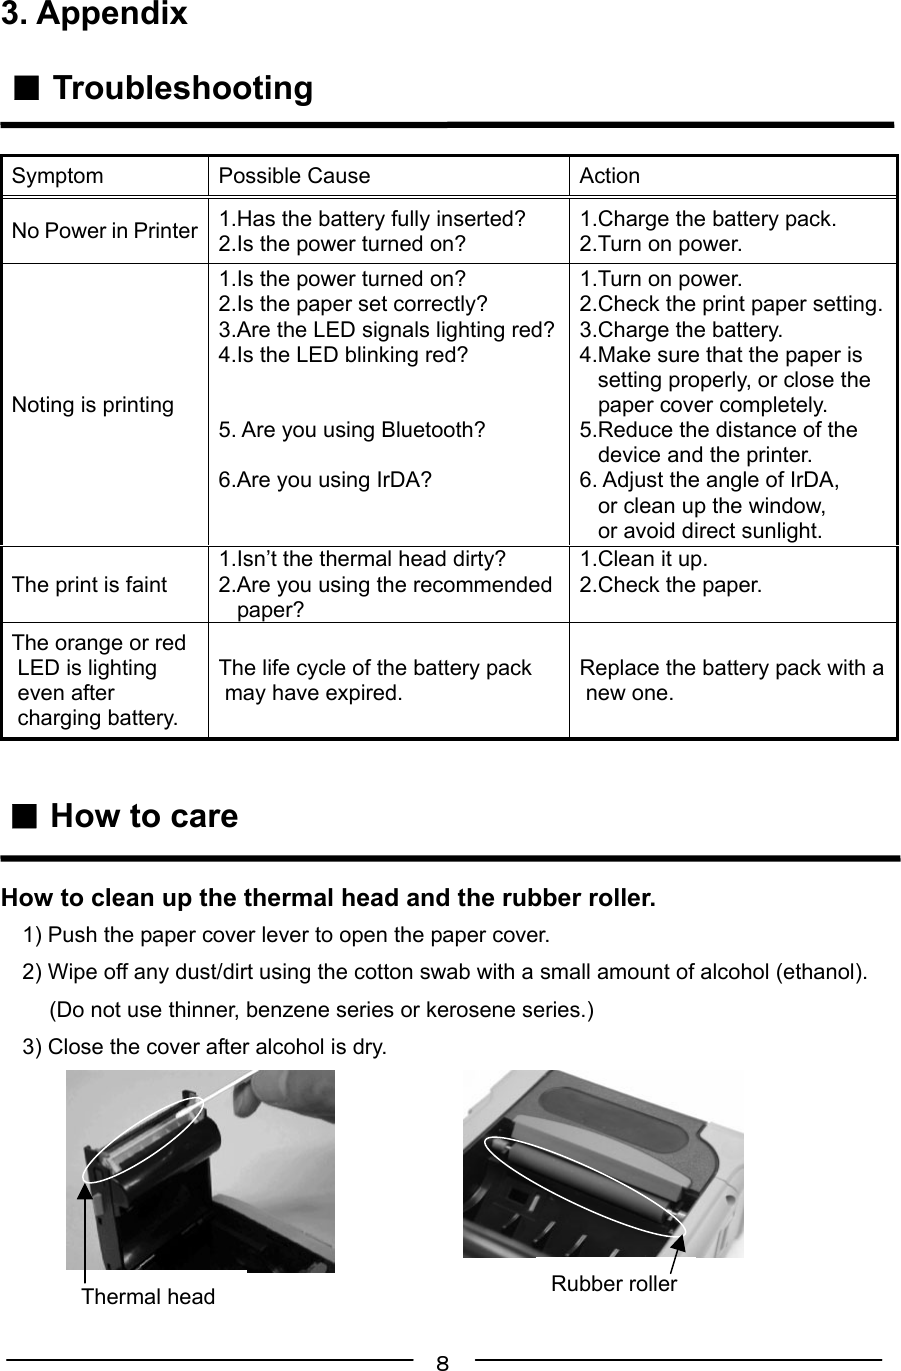 ８3. Appendix ■ TroubleshootingSymptom Possible Cause ActionNo Power in Printer 1.Has the battery fully inserted?2.Is the power turned on?1.Charge the battery pack.2.Turn on power.Noting is printing1.Is the power turned on?2.Is the paper set correctly?3.Are the LED signals lighting red?4.Is the LED blinking red?5. Are you using Bluetooth?6.Are you using IrDA?1.Turn on power.2.Check the print paper setting.3.Charge the battery.4.Make sure that the paper is   setting properly, or close the   paper cover completely.5.Reduce the distance of the   device and the printer.6. Adjust the angle of IrDA,   or clean up the window,   or avoid direct sunlight.The print is faint1.Isn’t the thermal head dirty?2.Are you using the recommended   paper?1.Clean it up.2.Check the paper.The orange or red LED is lighting even after charging battery.The life cycle of the battery pack may have expired.Replace the battery pack with a new one. ■ How to careHow to clean up the thermal head and the rubber roller.1) Push the paper cover lever to open the paper cover.2) Wipe off any dust/dirt using the cotton swab with a small amount of alcohol (ethanol).        (Do not use thinner, benzene series or kerosene series.)3) Close the cover after alcohol is dry.　　　Rubber rollerThermal head